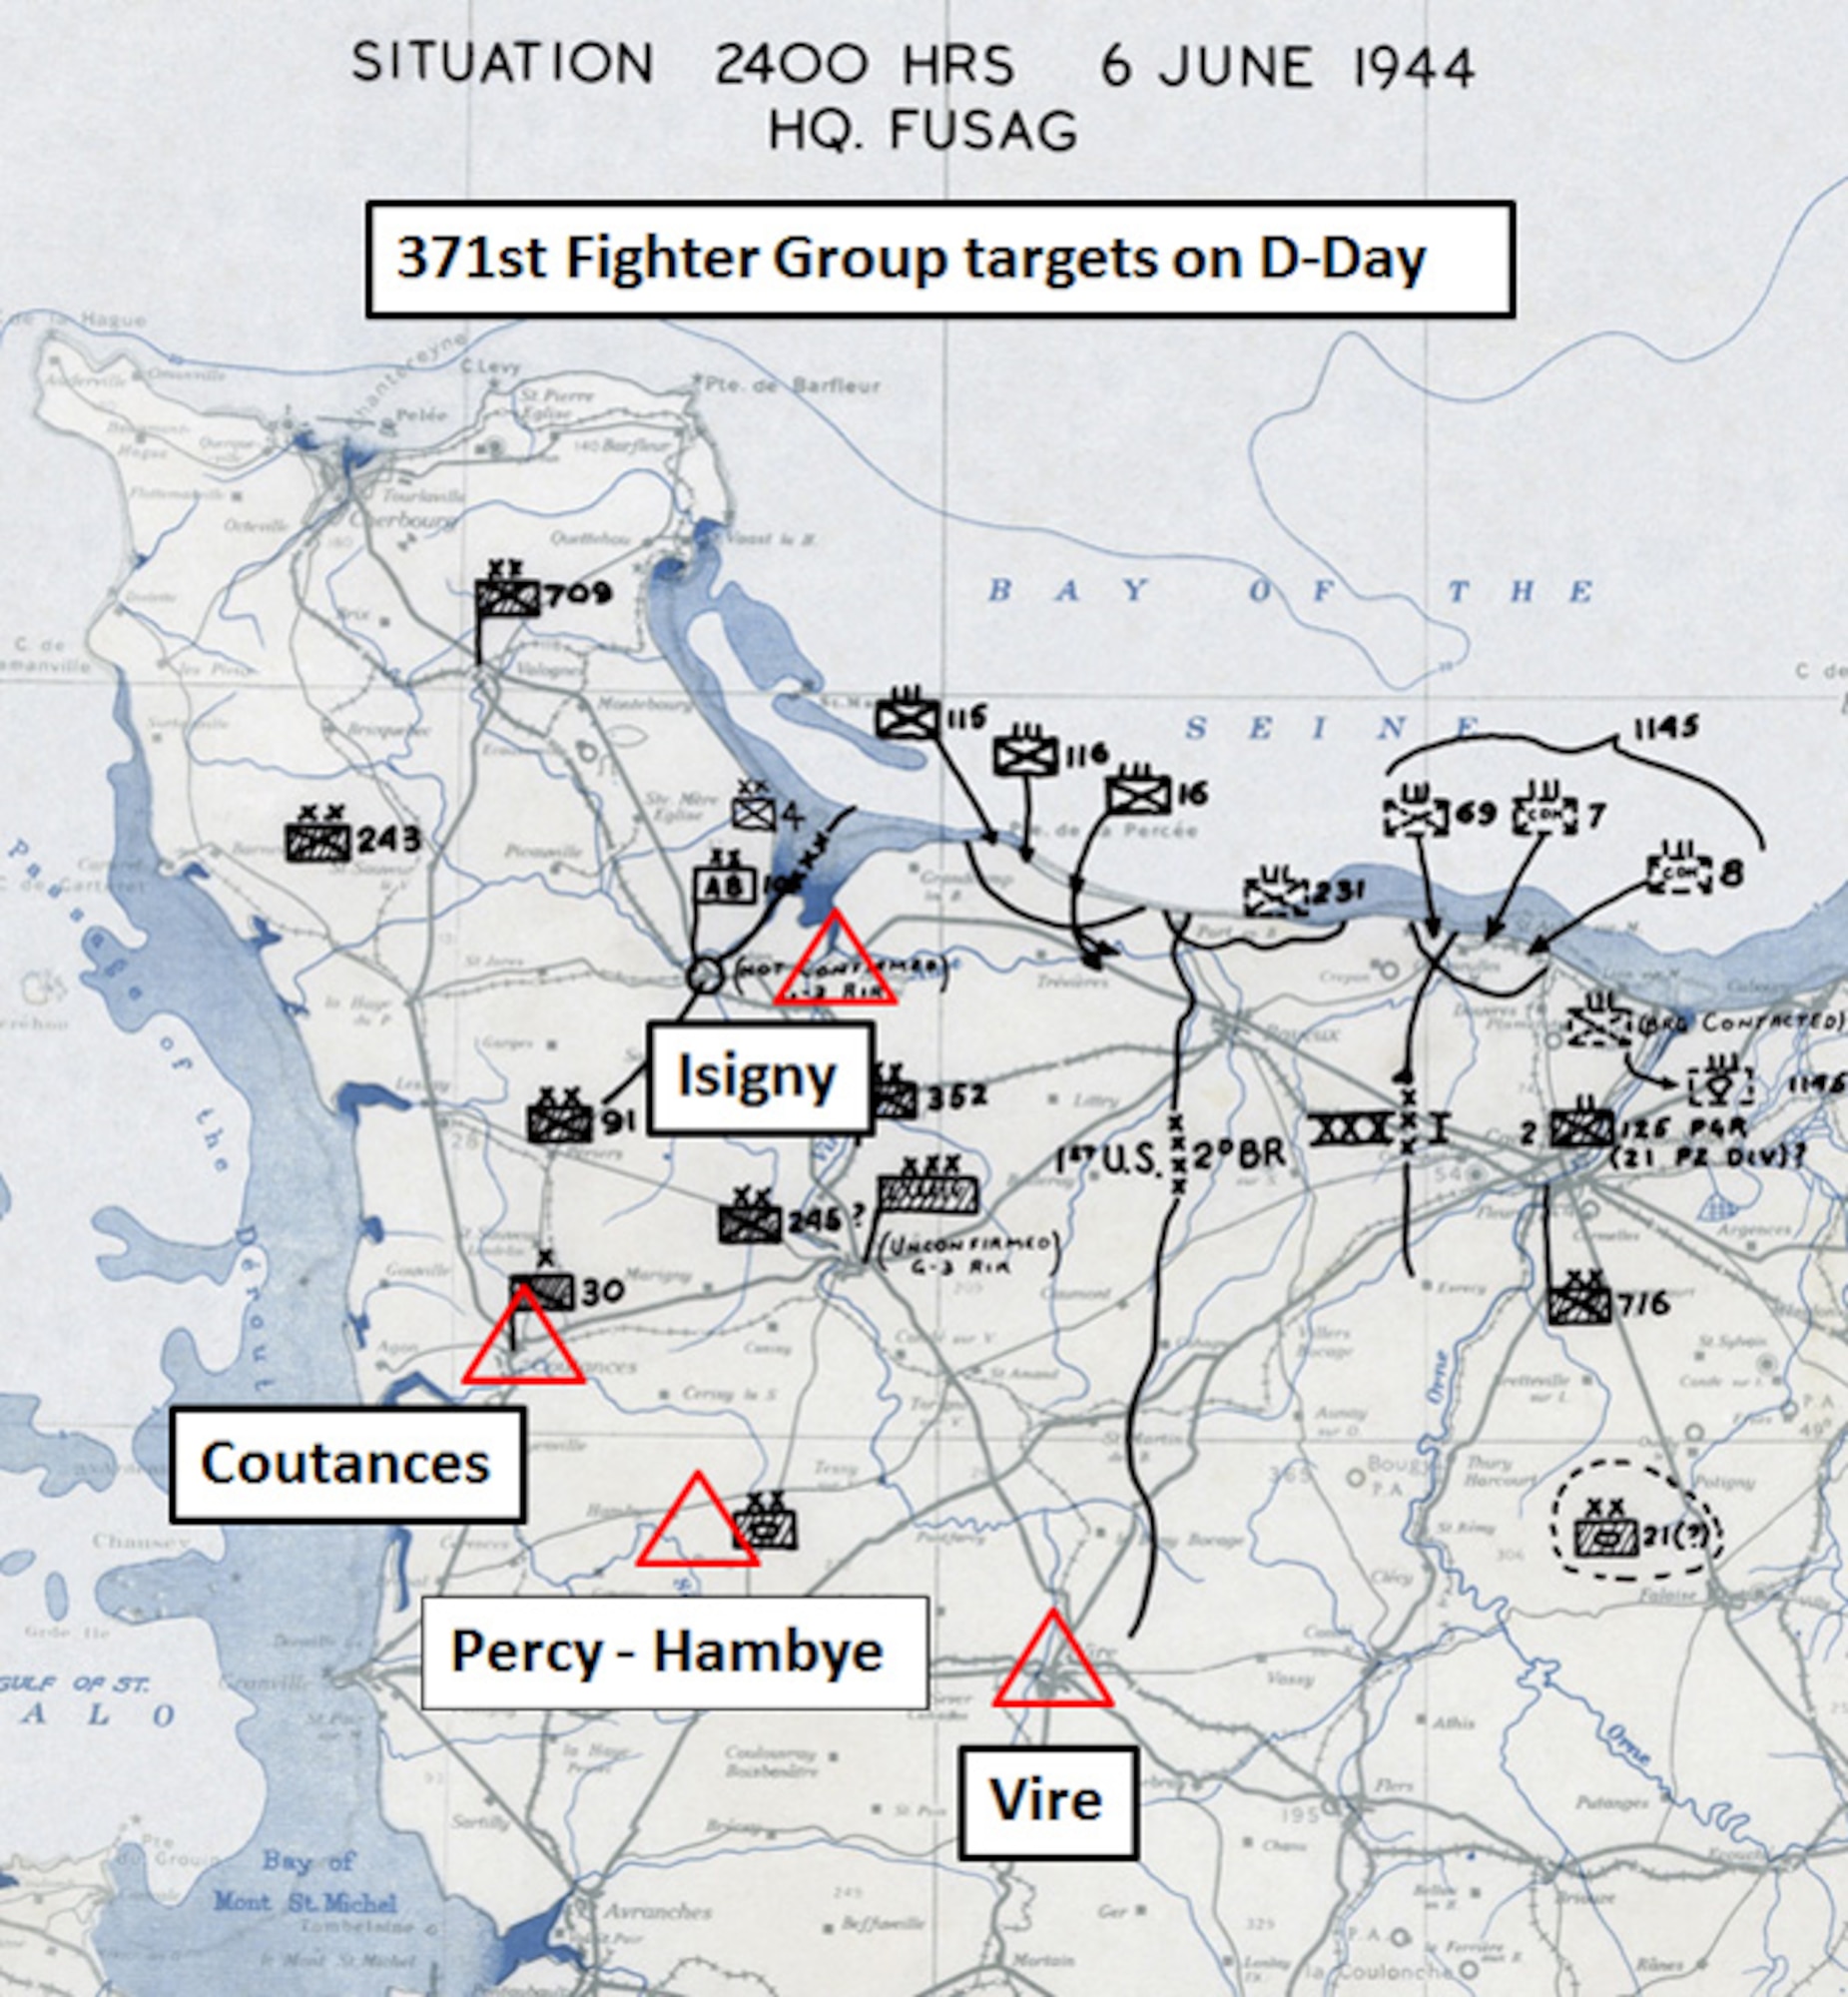 Depicted here are the target areas for the 371st Fighter Group on D-Day, 6 June 1944.  The more distant targets were struck in the first mission, while the second mission of the day took place at Isigny, nearest to the American landing beaches at Omaha and Utah.